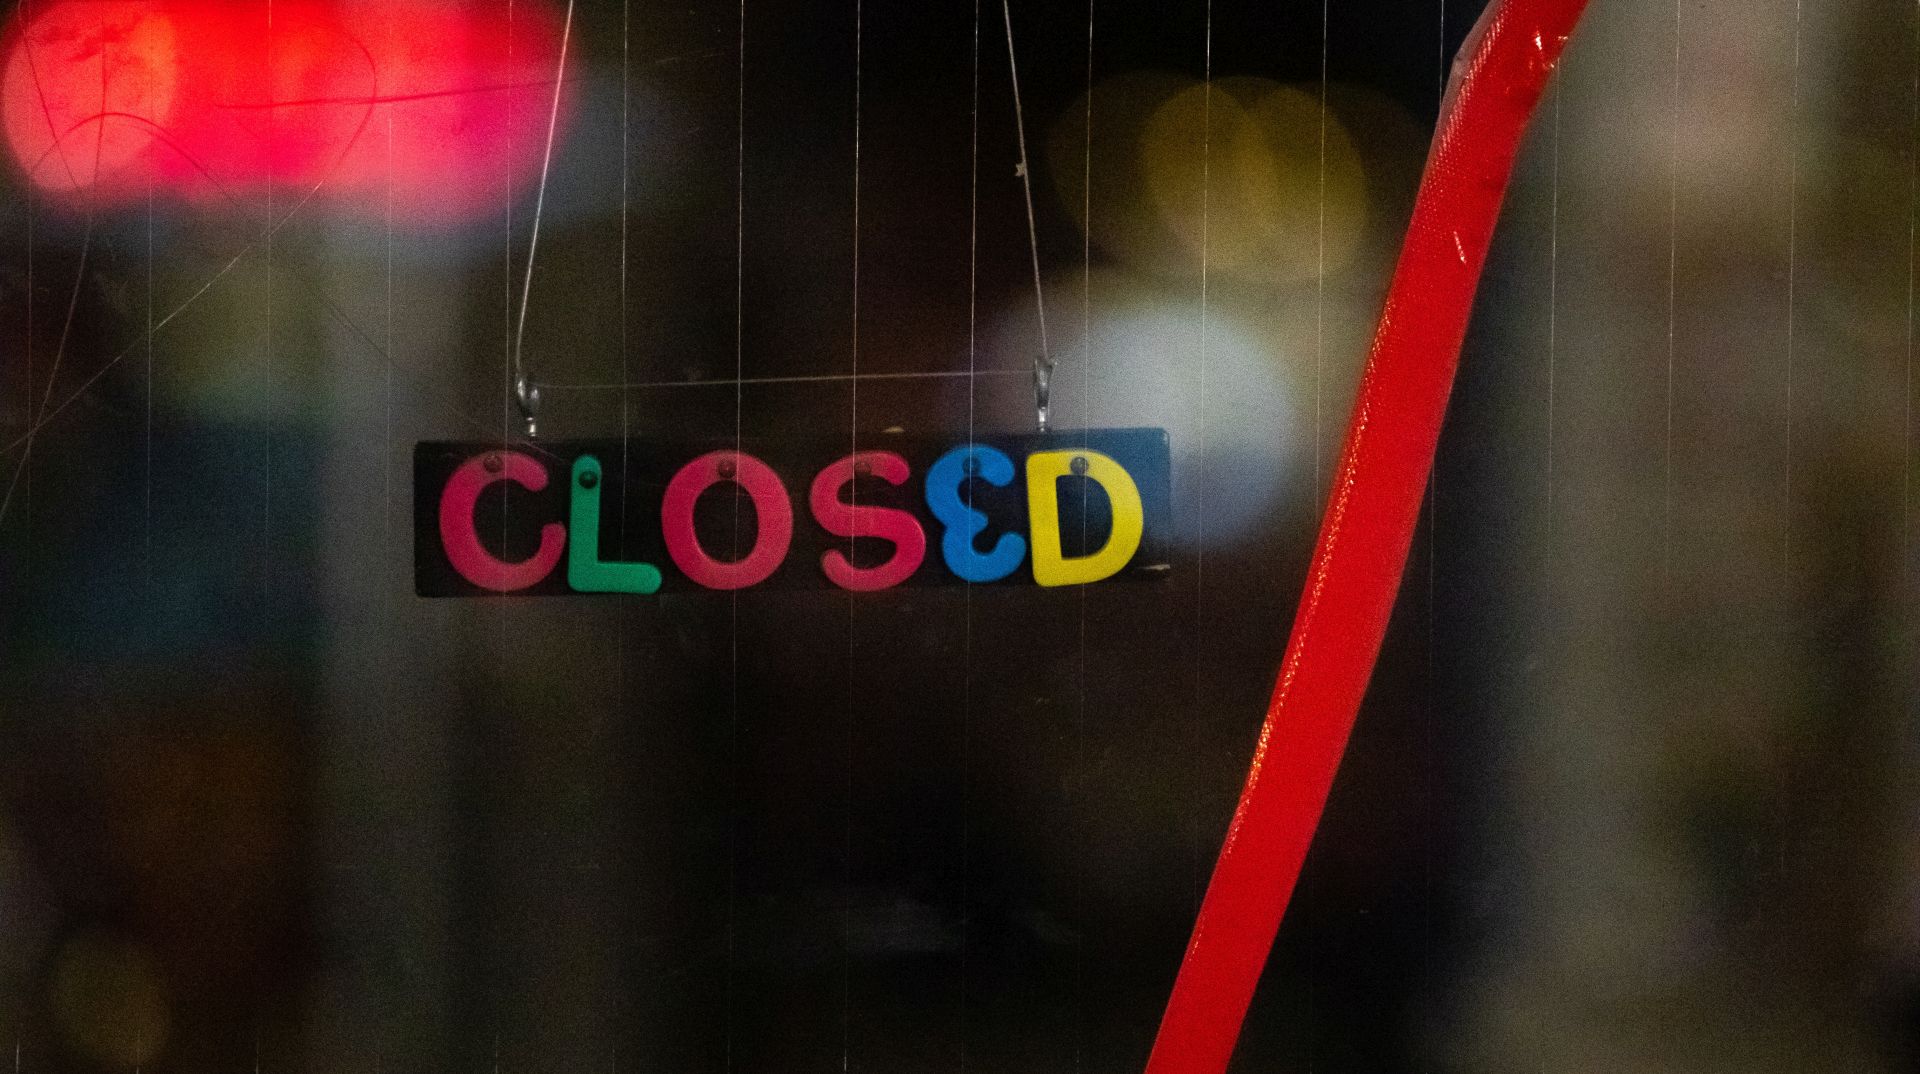 epa08781495 A sign reading 'Closed' is seen on a glass door of a restaurant in Berlin, Germany, 28 October 2020. German Chancellor Angela Merkel met Prime Ministers of Federal states at the chancellery and have agreed on common and nationwide restrictions to prevent a further explosion in the number of corona infections, such as closing bars and restaurants for a month.  EPA/HAYOUNG JEON